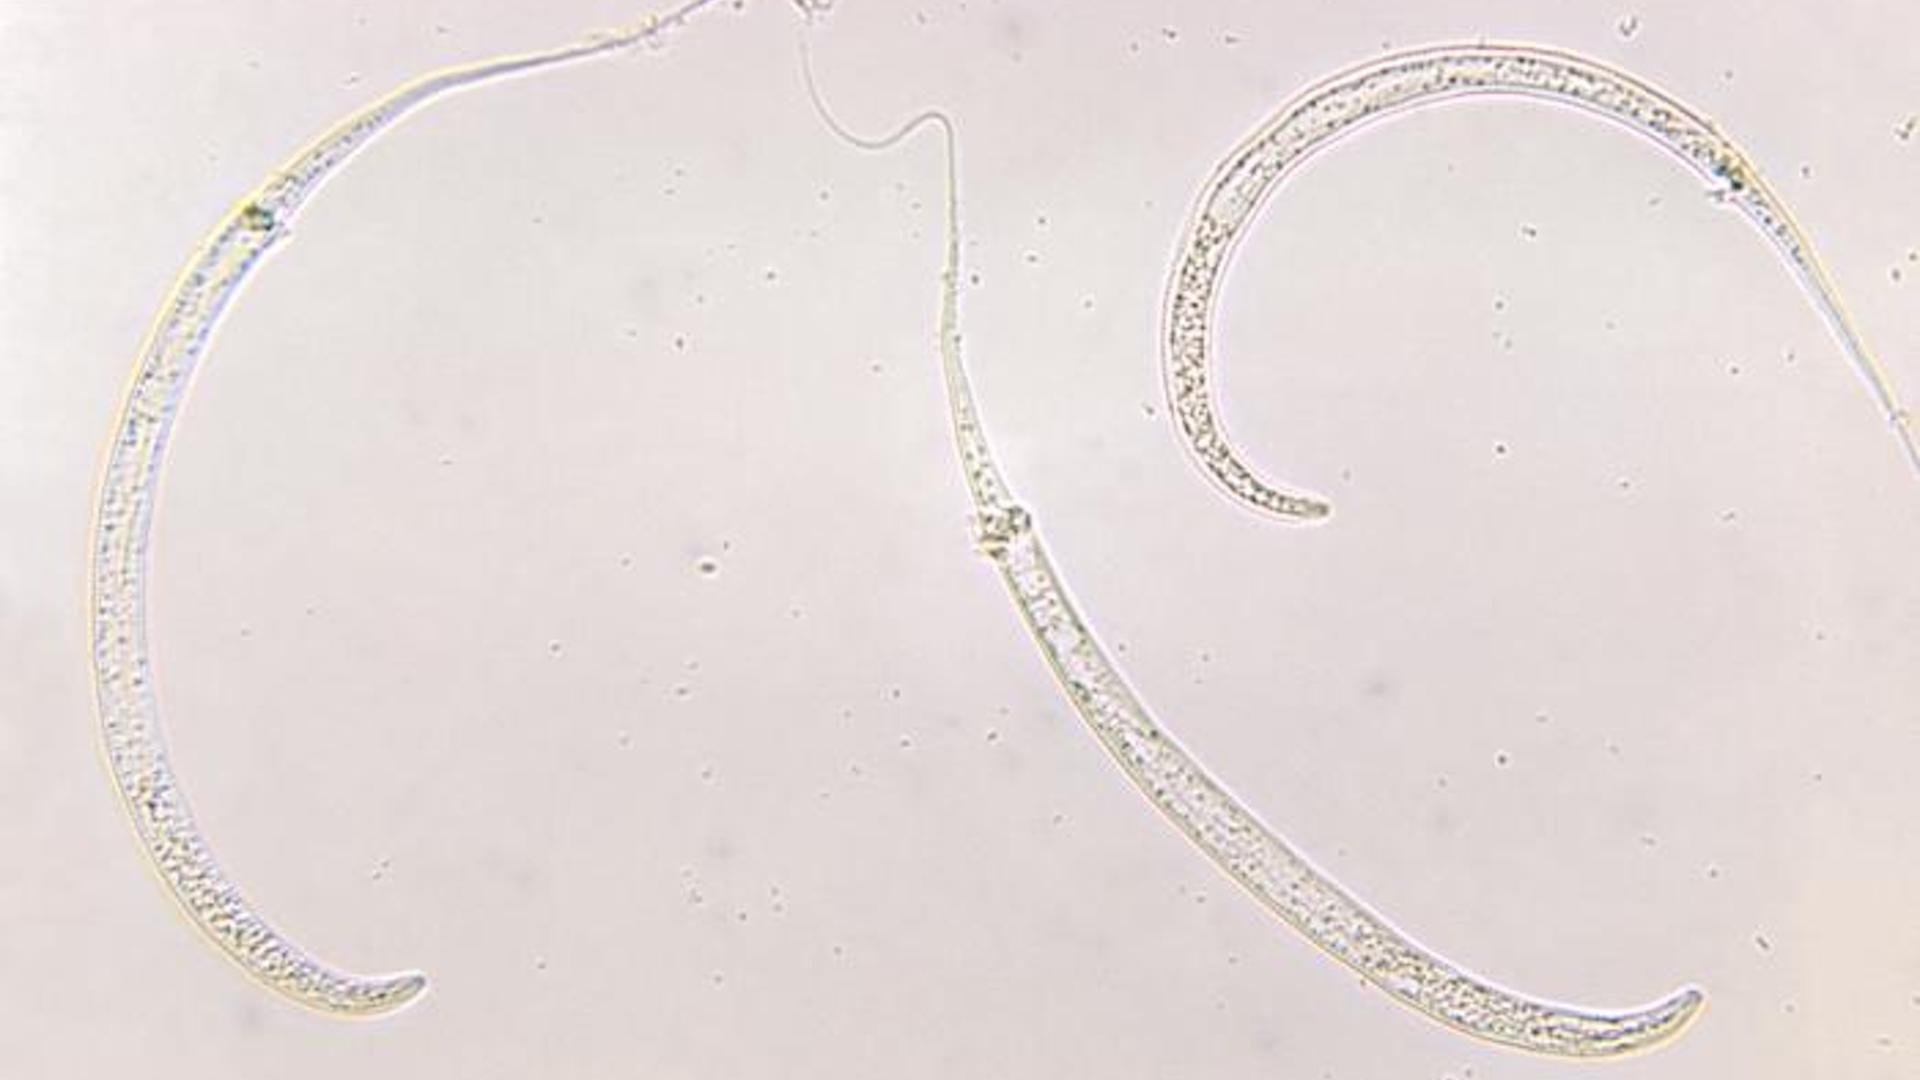 Under a magnification of 125X, this photomicrograph revealed the presence of three Guinea worms, Dracunculiasis medinensis.